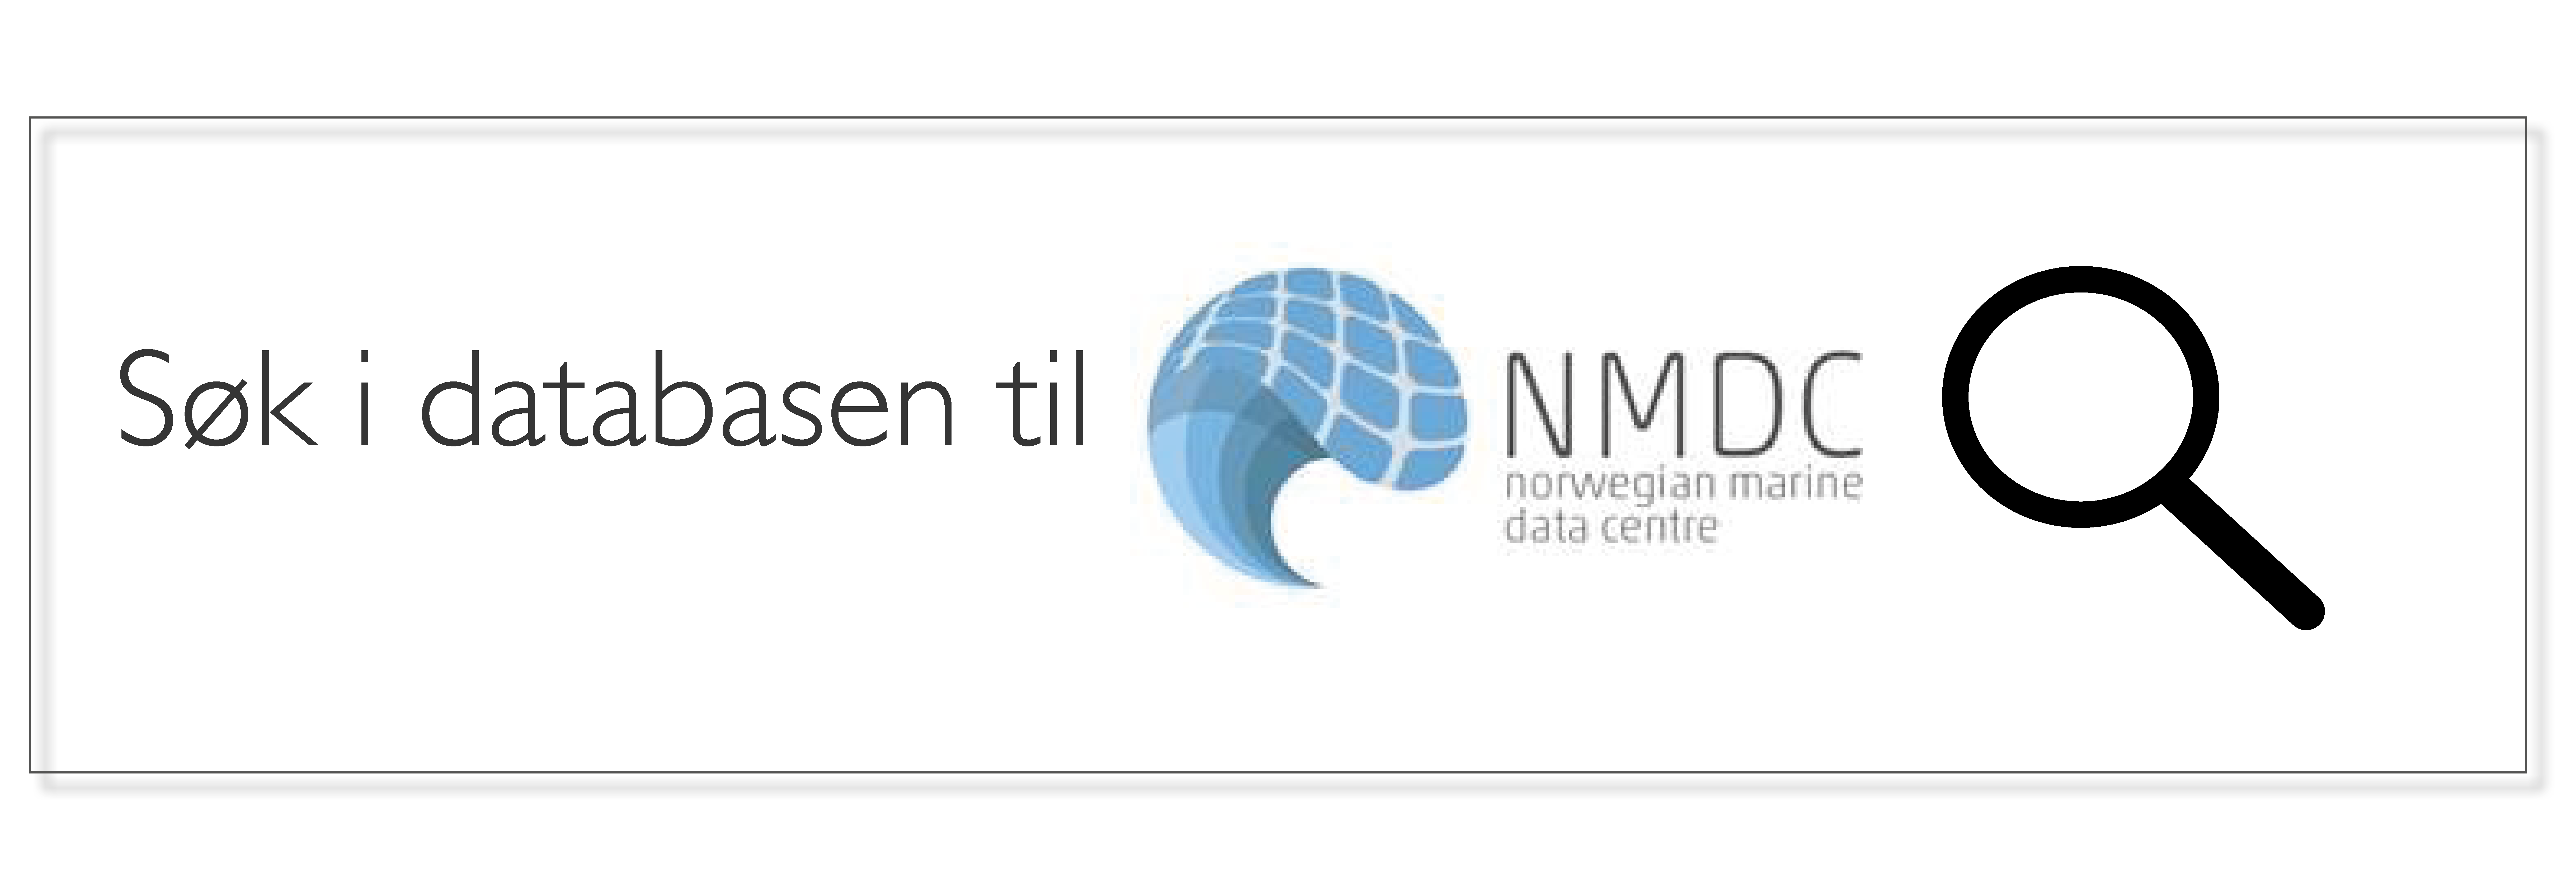 search the database of NMDC